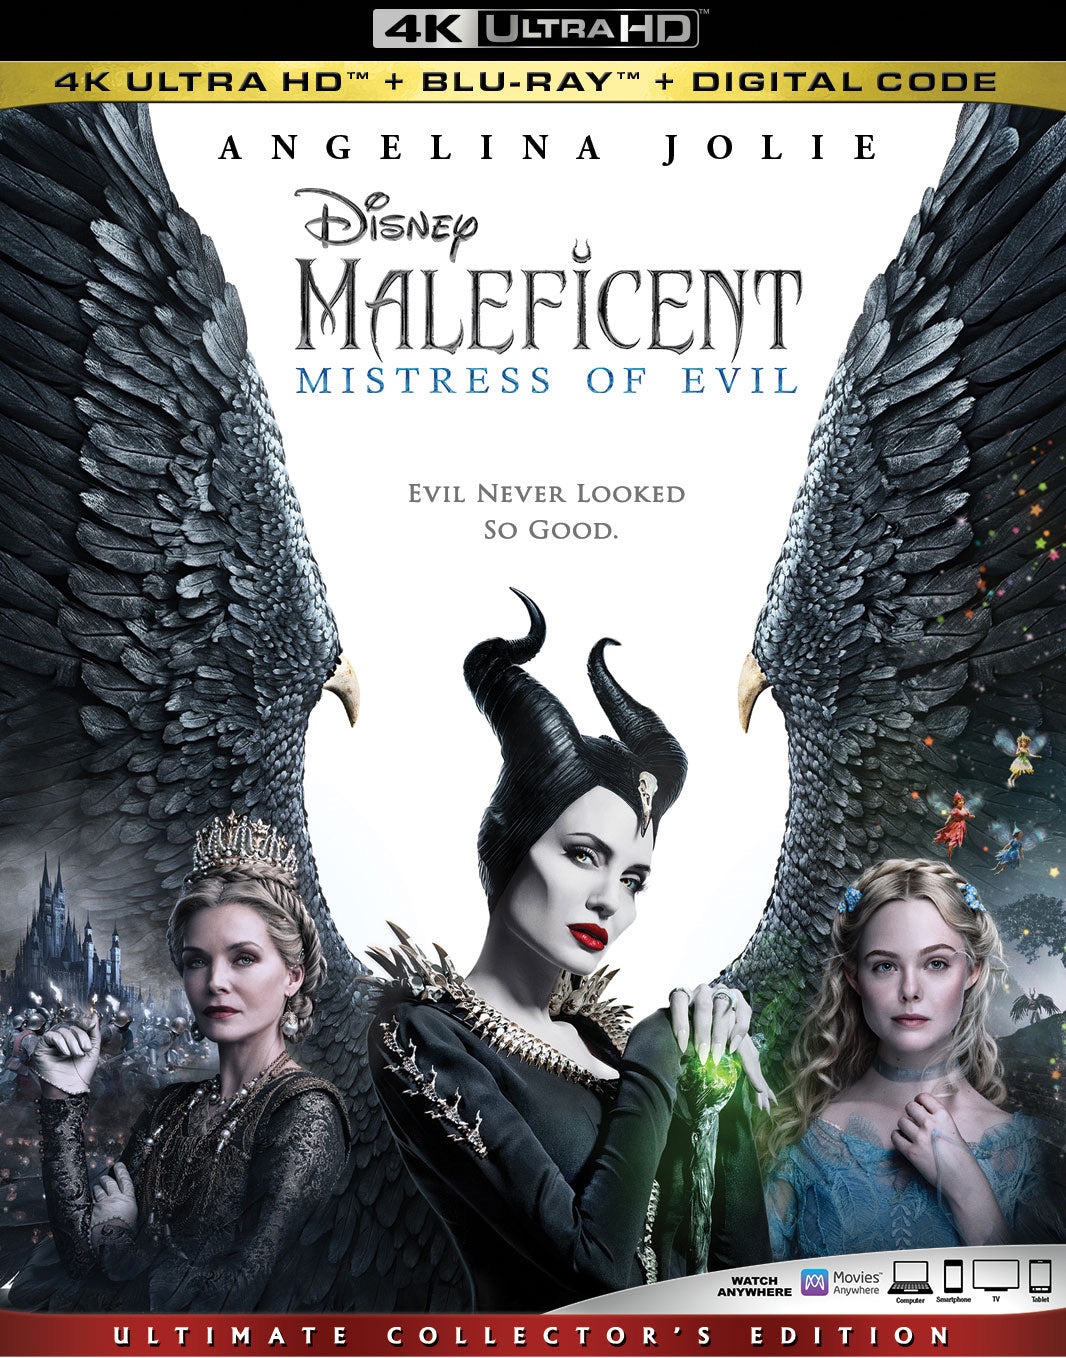 Maleficent: Mistress of Evil (2019) Vudu or Movies Anywhere 4K redemption only